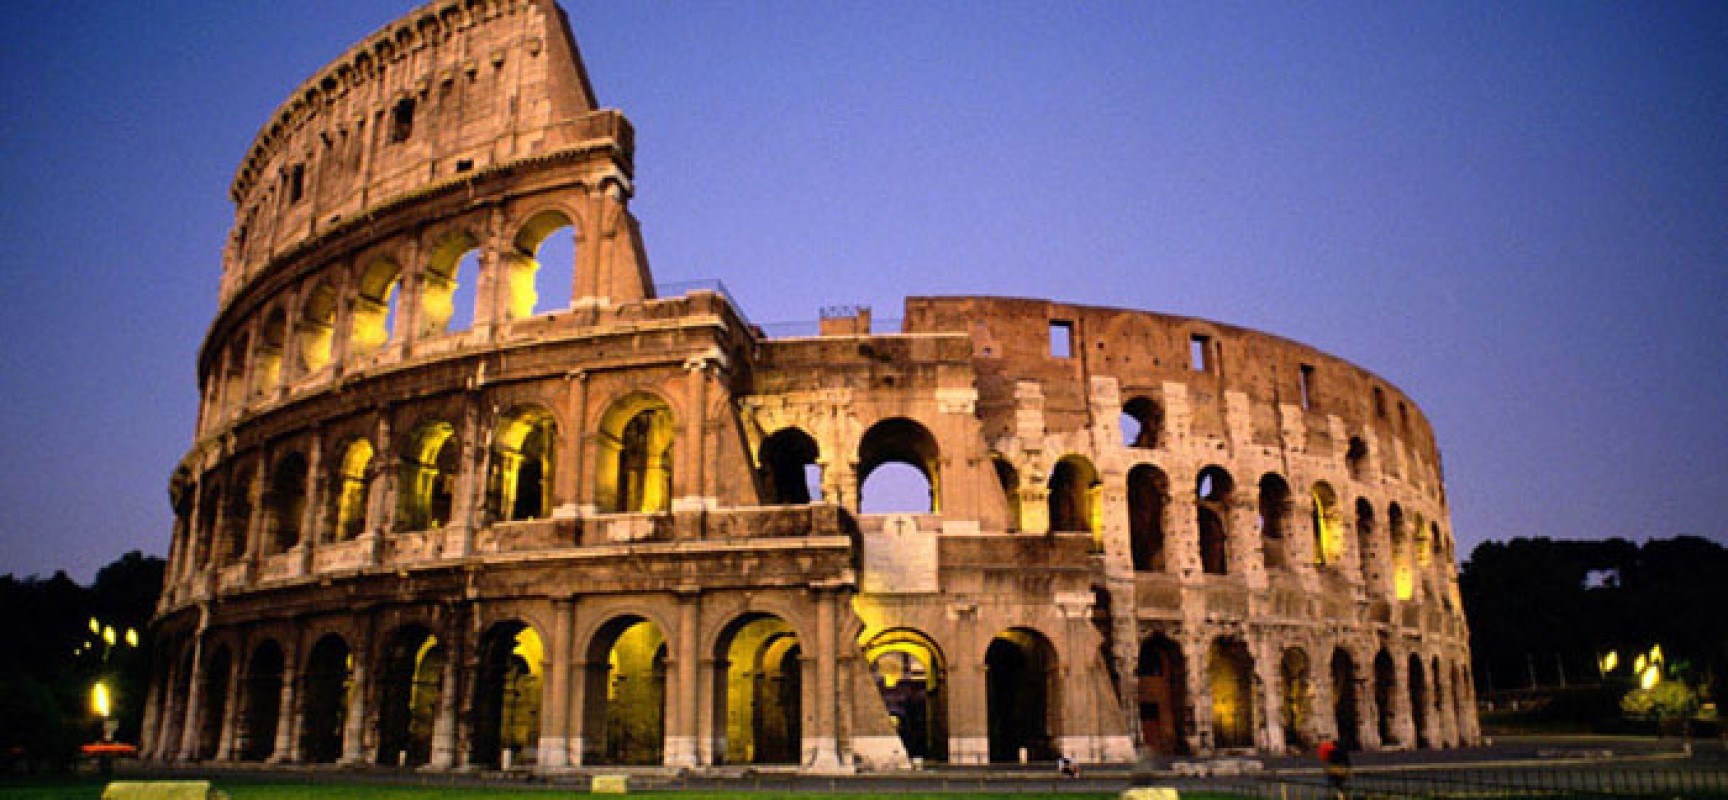 Colosseum The Biggest Amphitheater In Rome | Travel Featured
